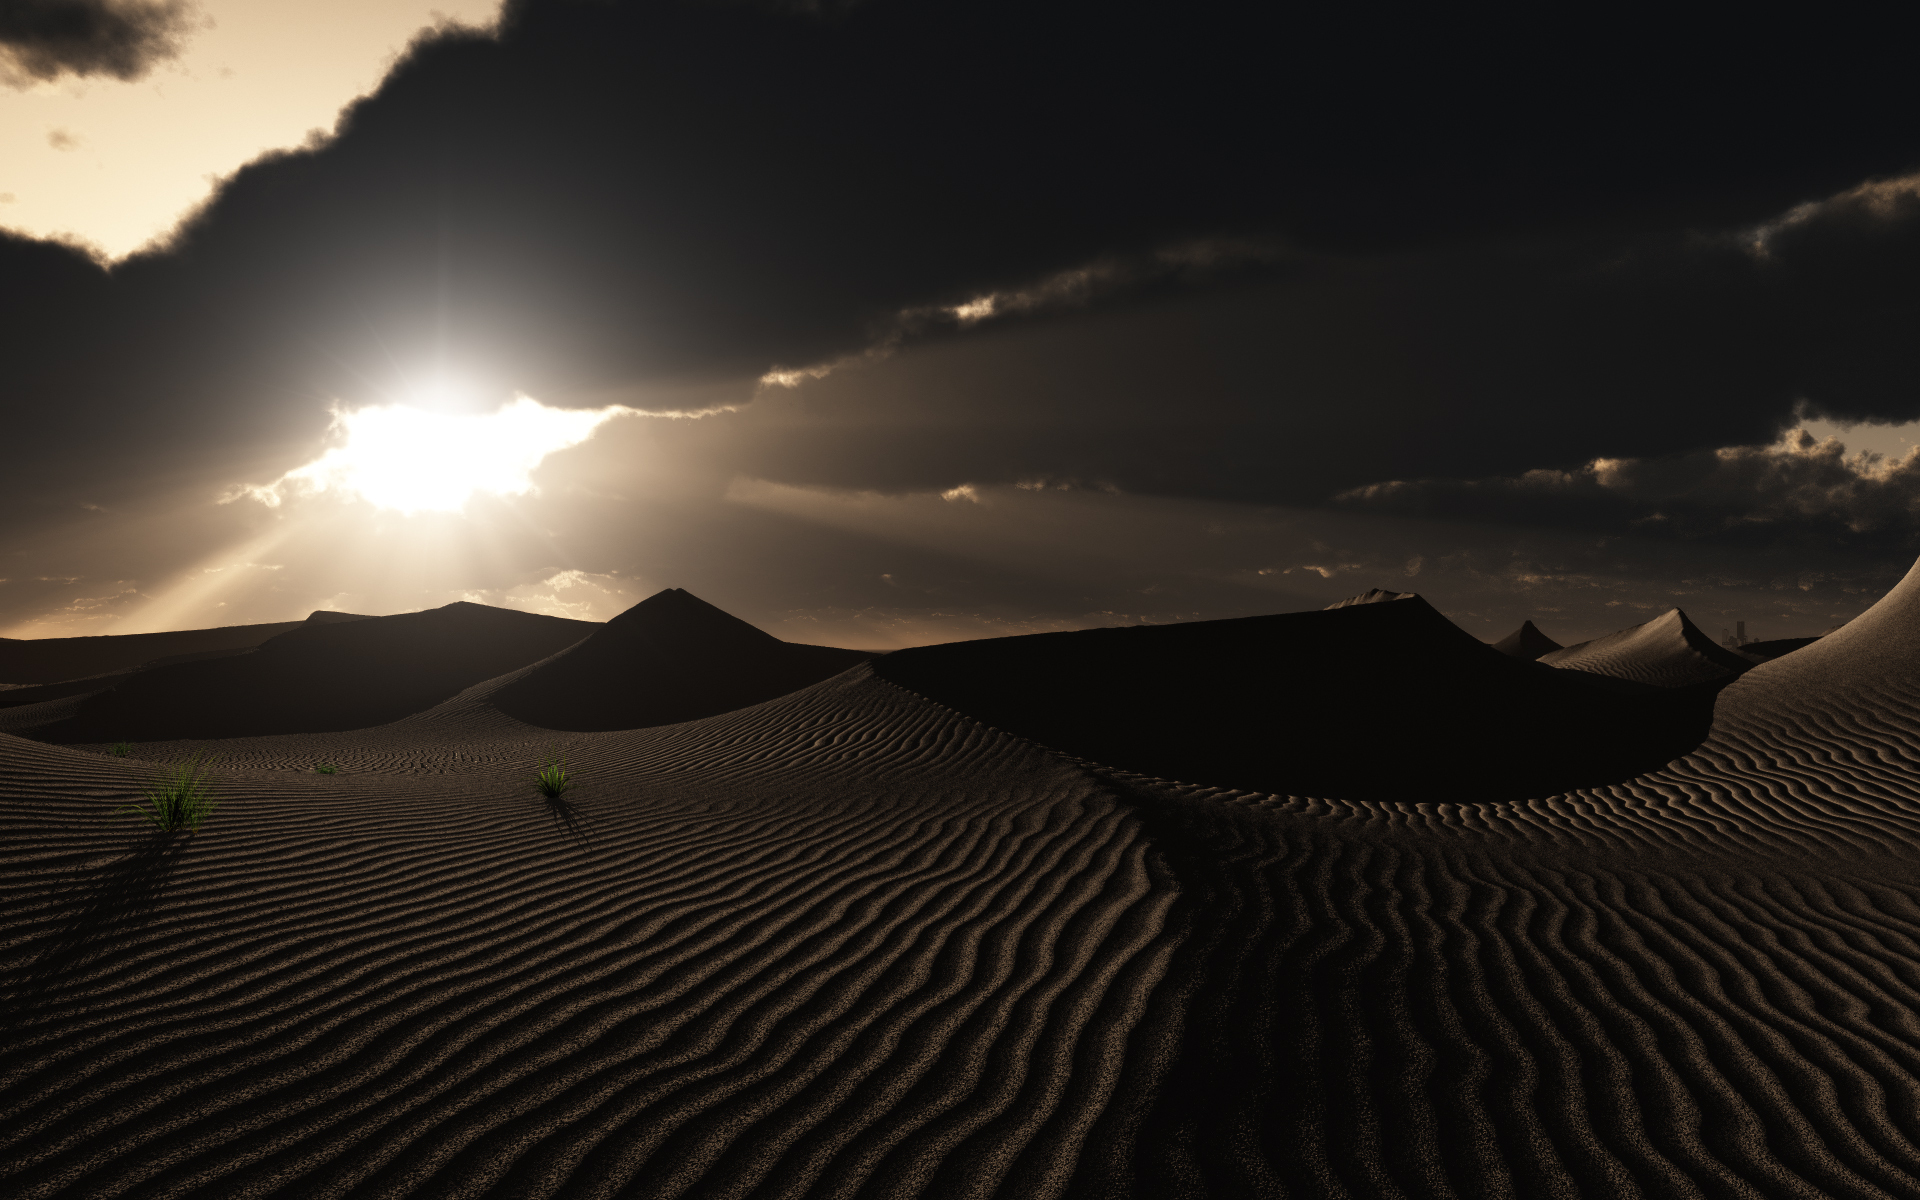  Dune HD Android Wallpapers